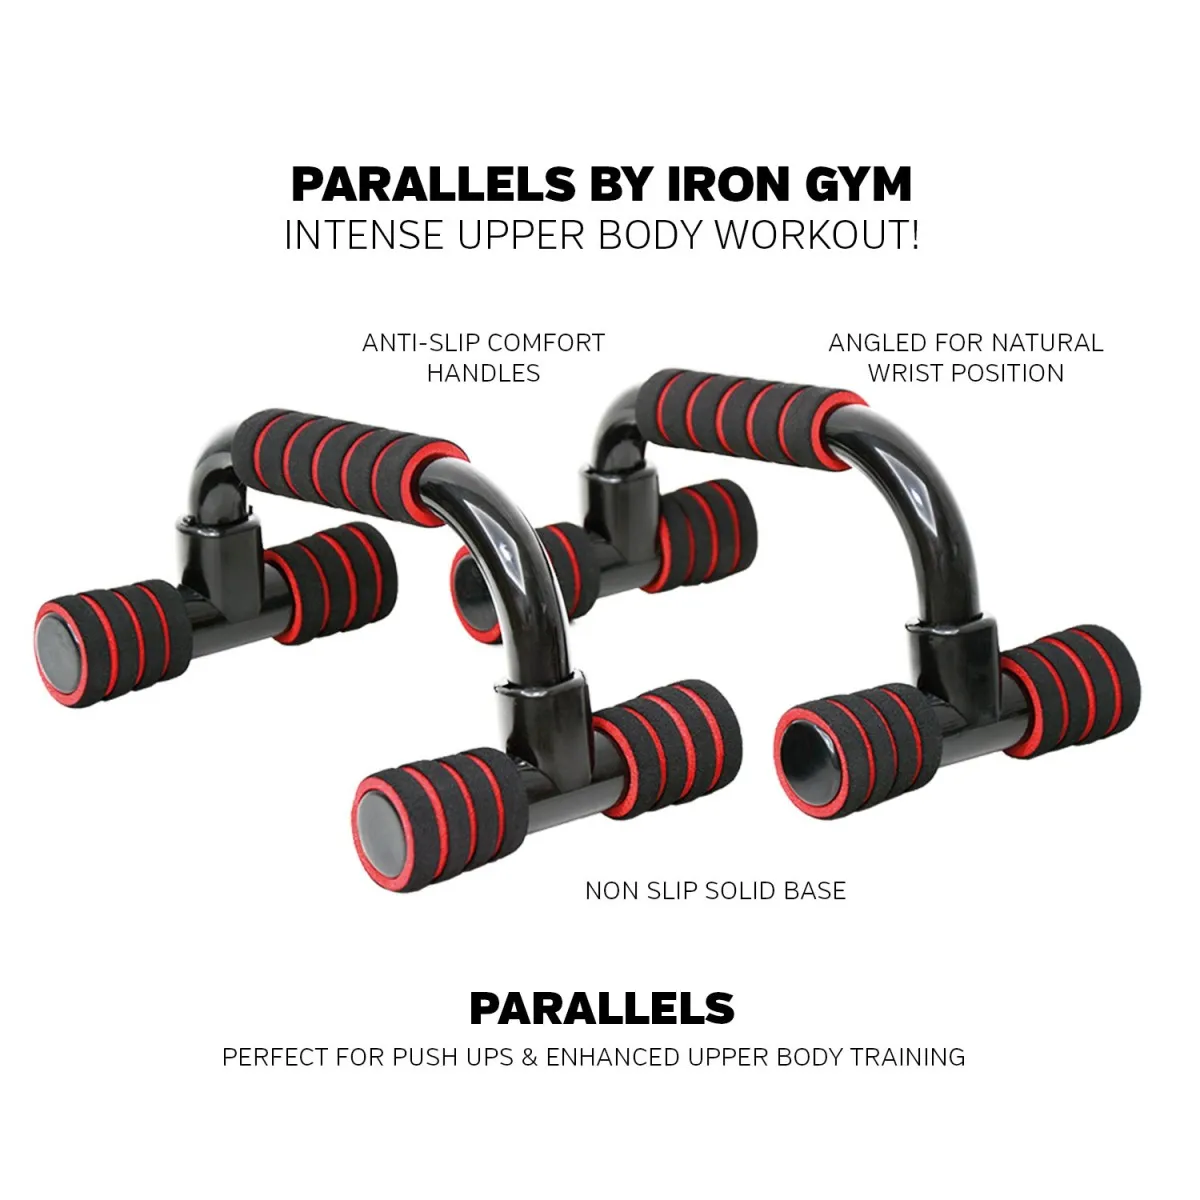 Iron Gym Parallels push-up grips